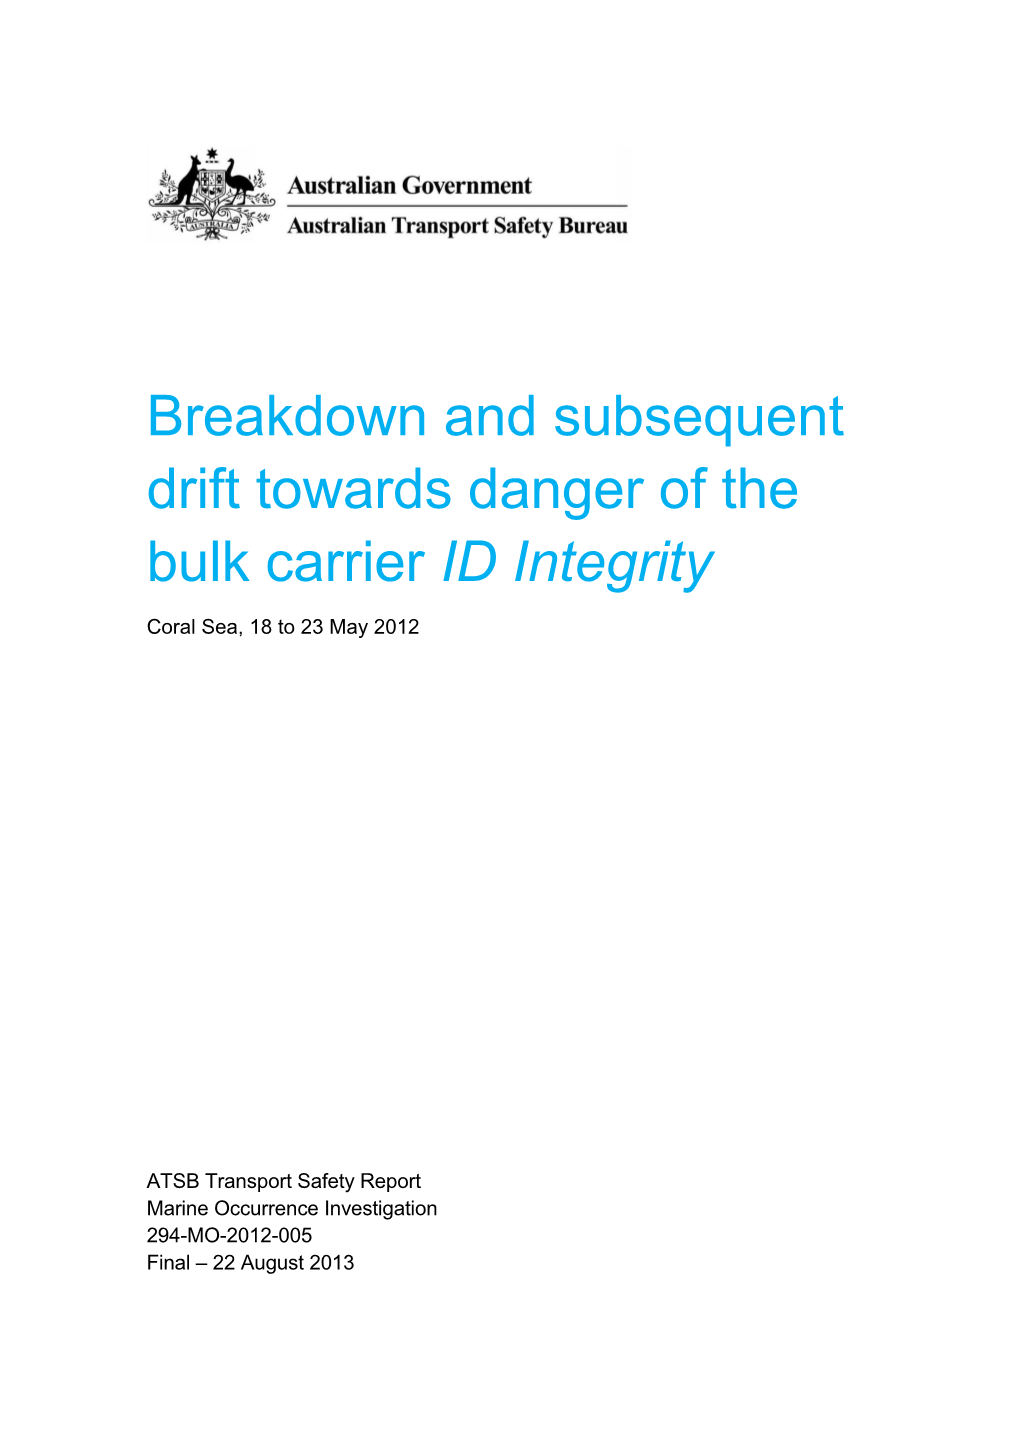 Breakdown and Subsequent Drift Towards Danger of the Bulk Carrier ID Integrity